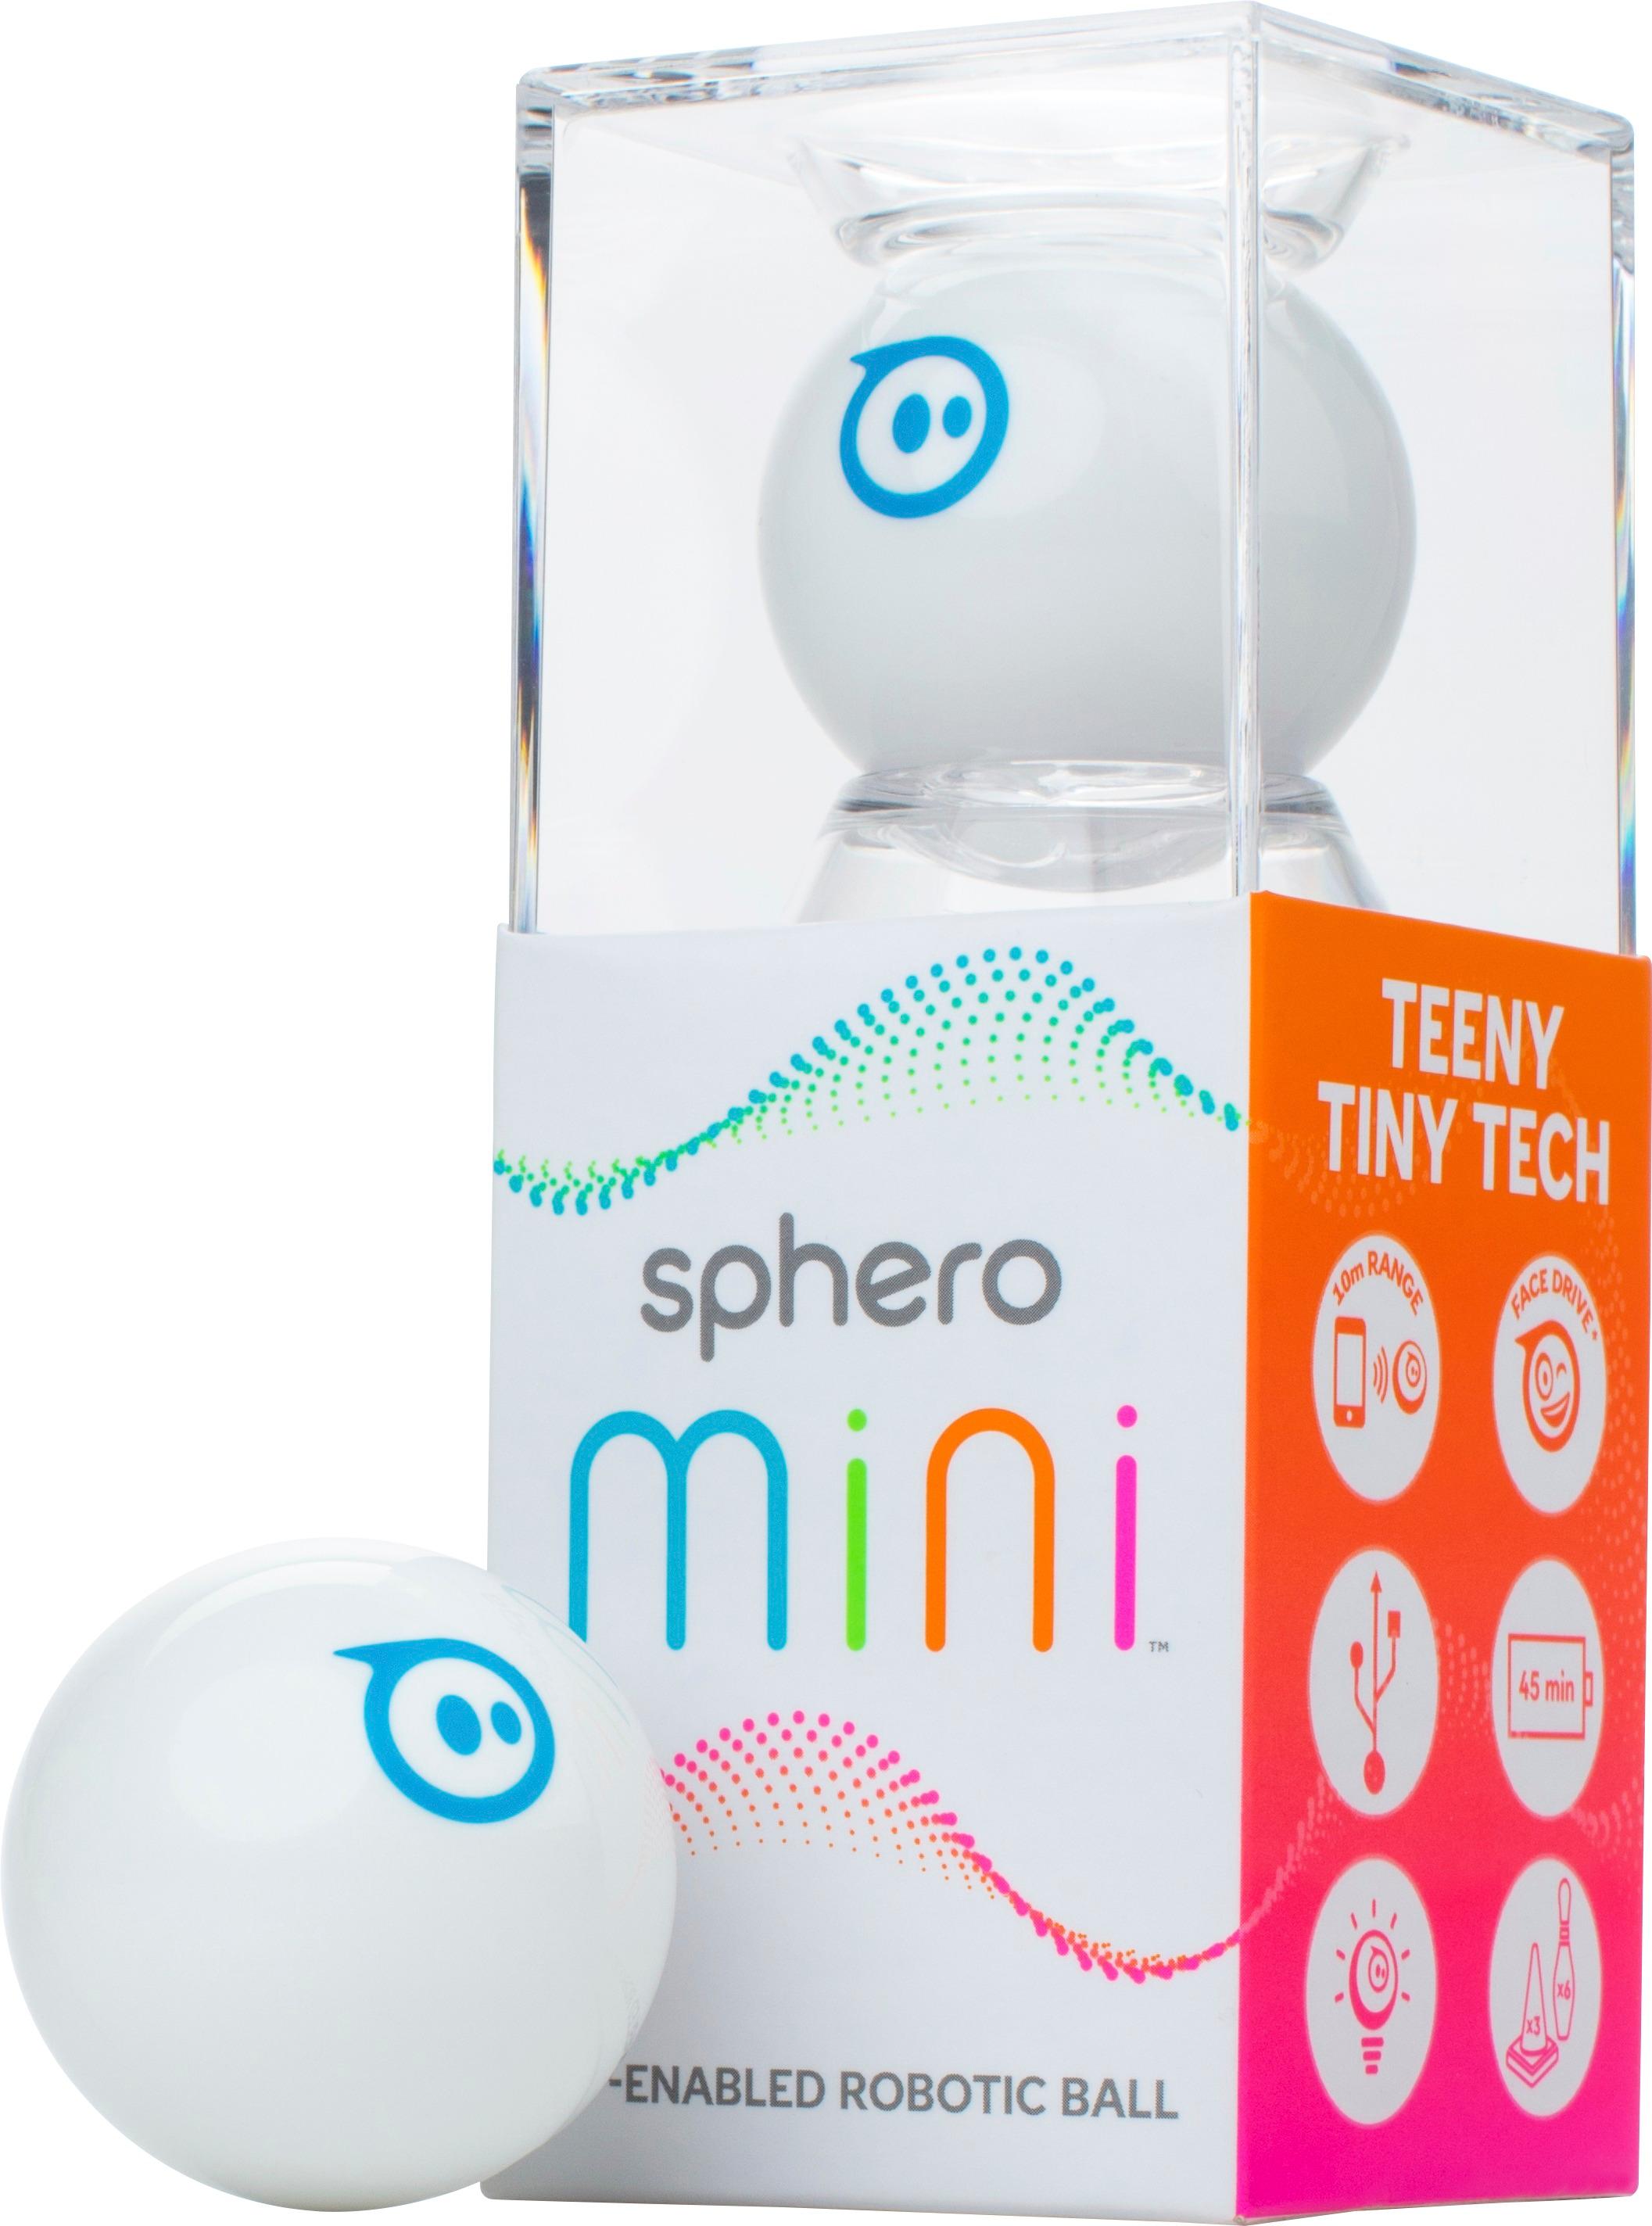 Sphero 2.0 The App-Enabled Robotic Ball for sale online 